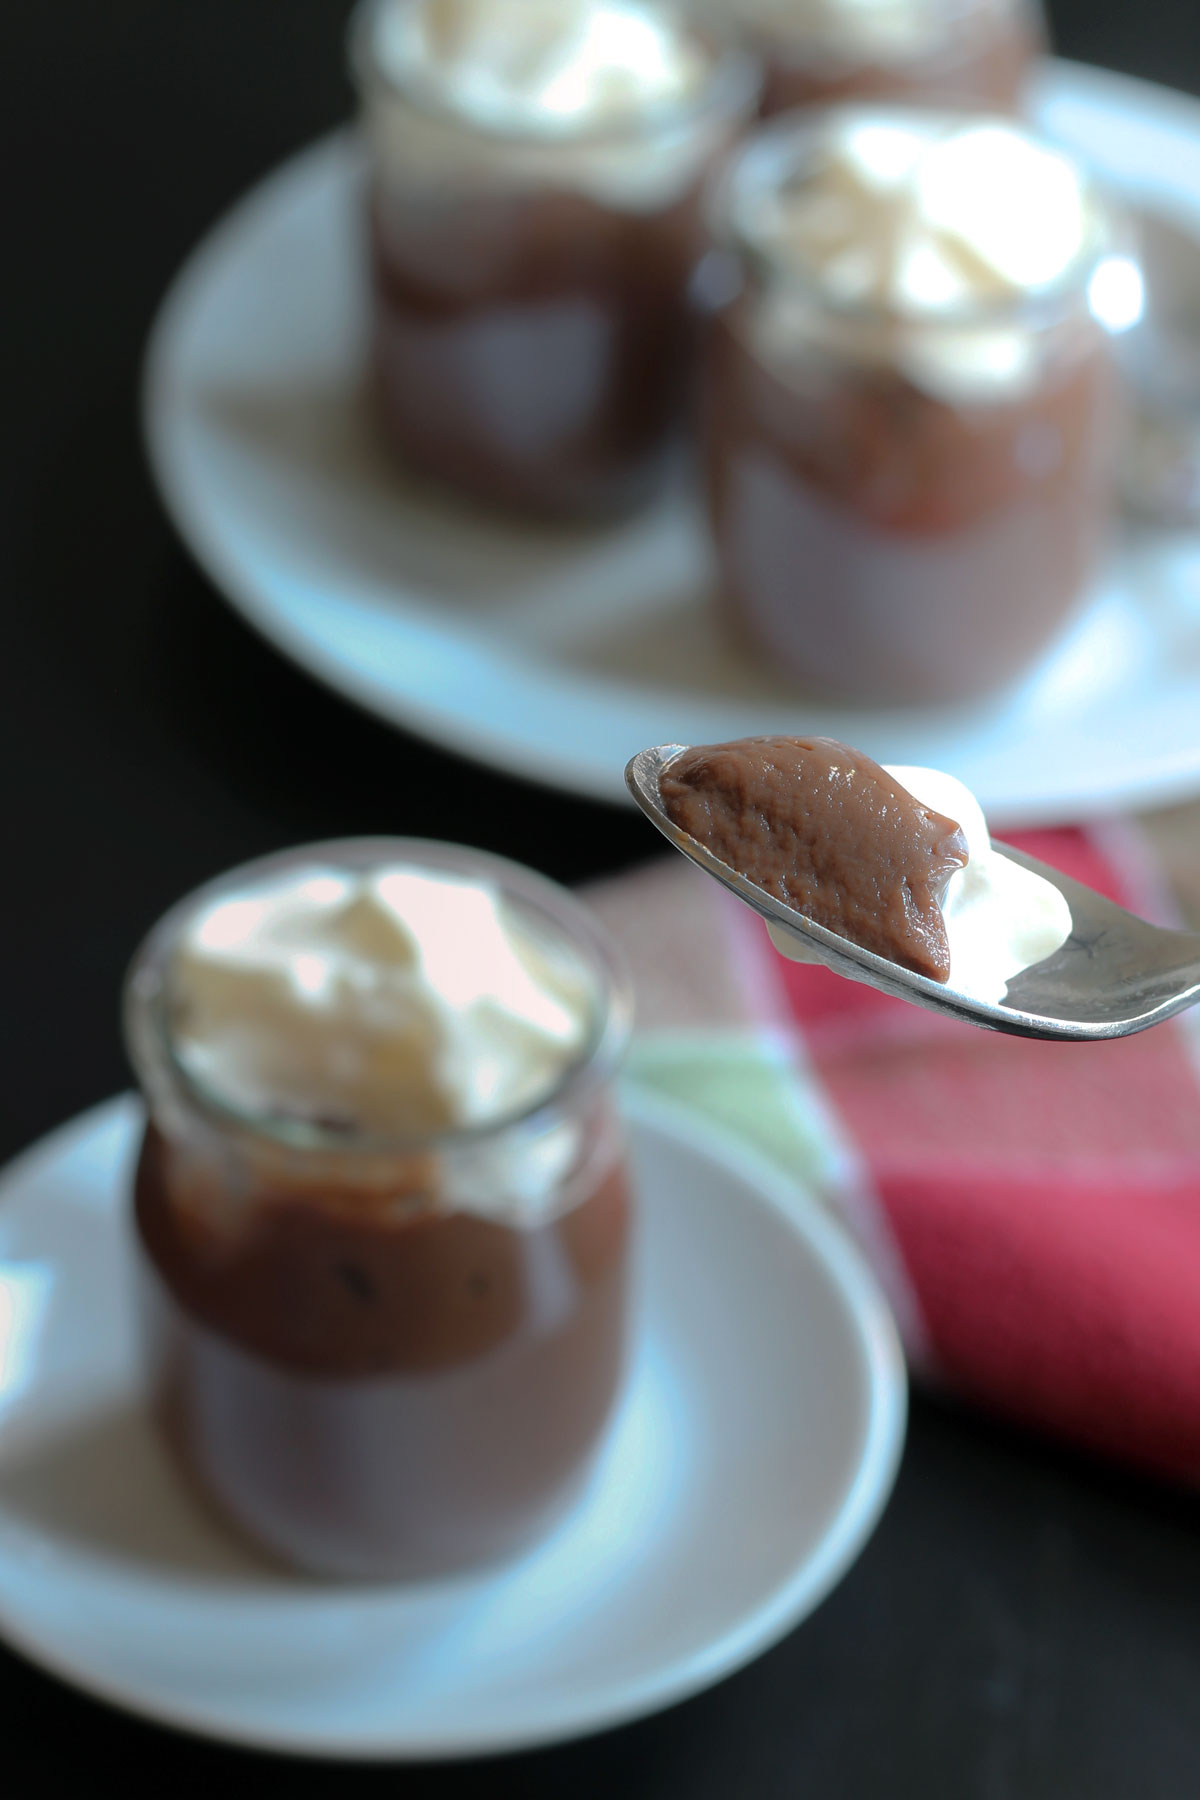 spoonful of pudding in the foreground with pots of chocolate pudding in the background.